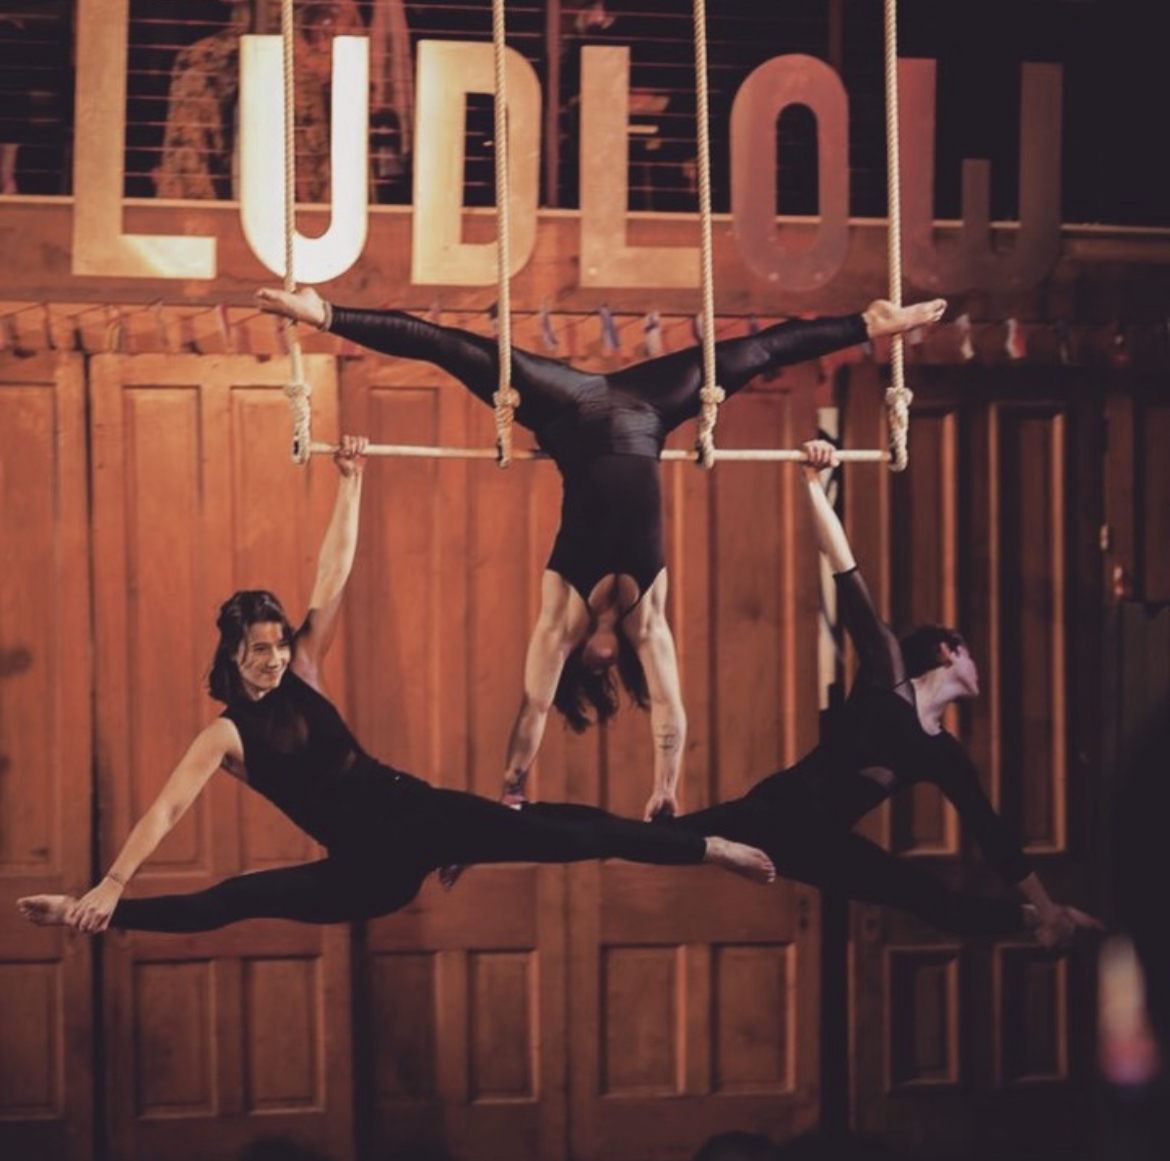 Image is of 3 trapeze artists in motion with the sign "Ludlow" behind them.